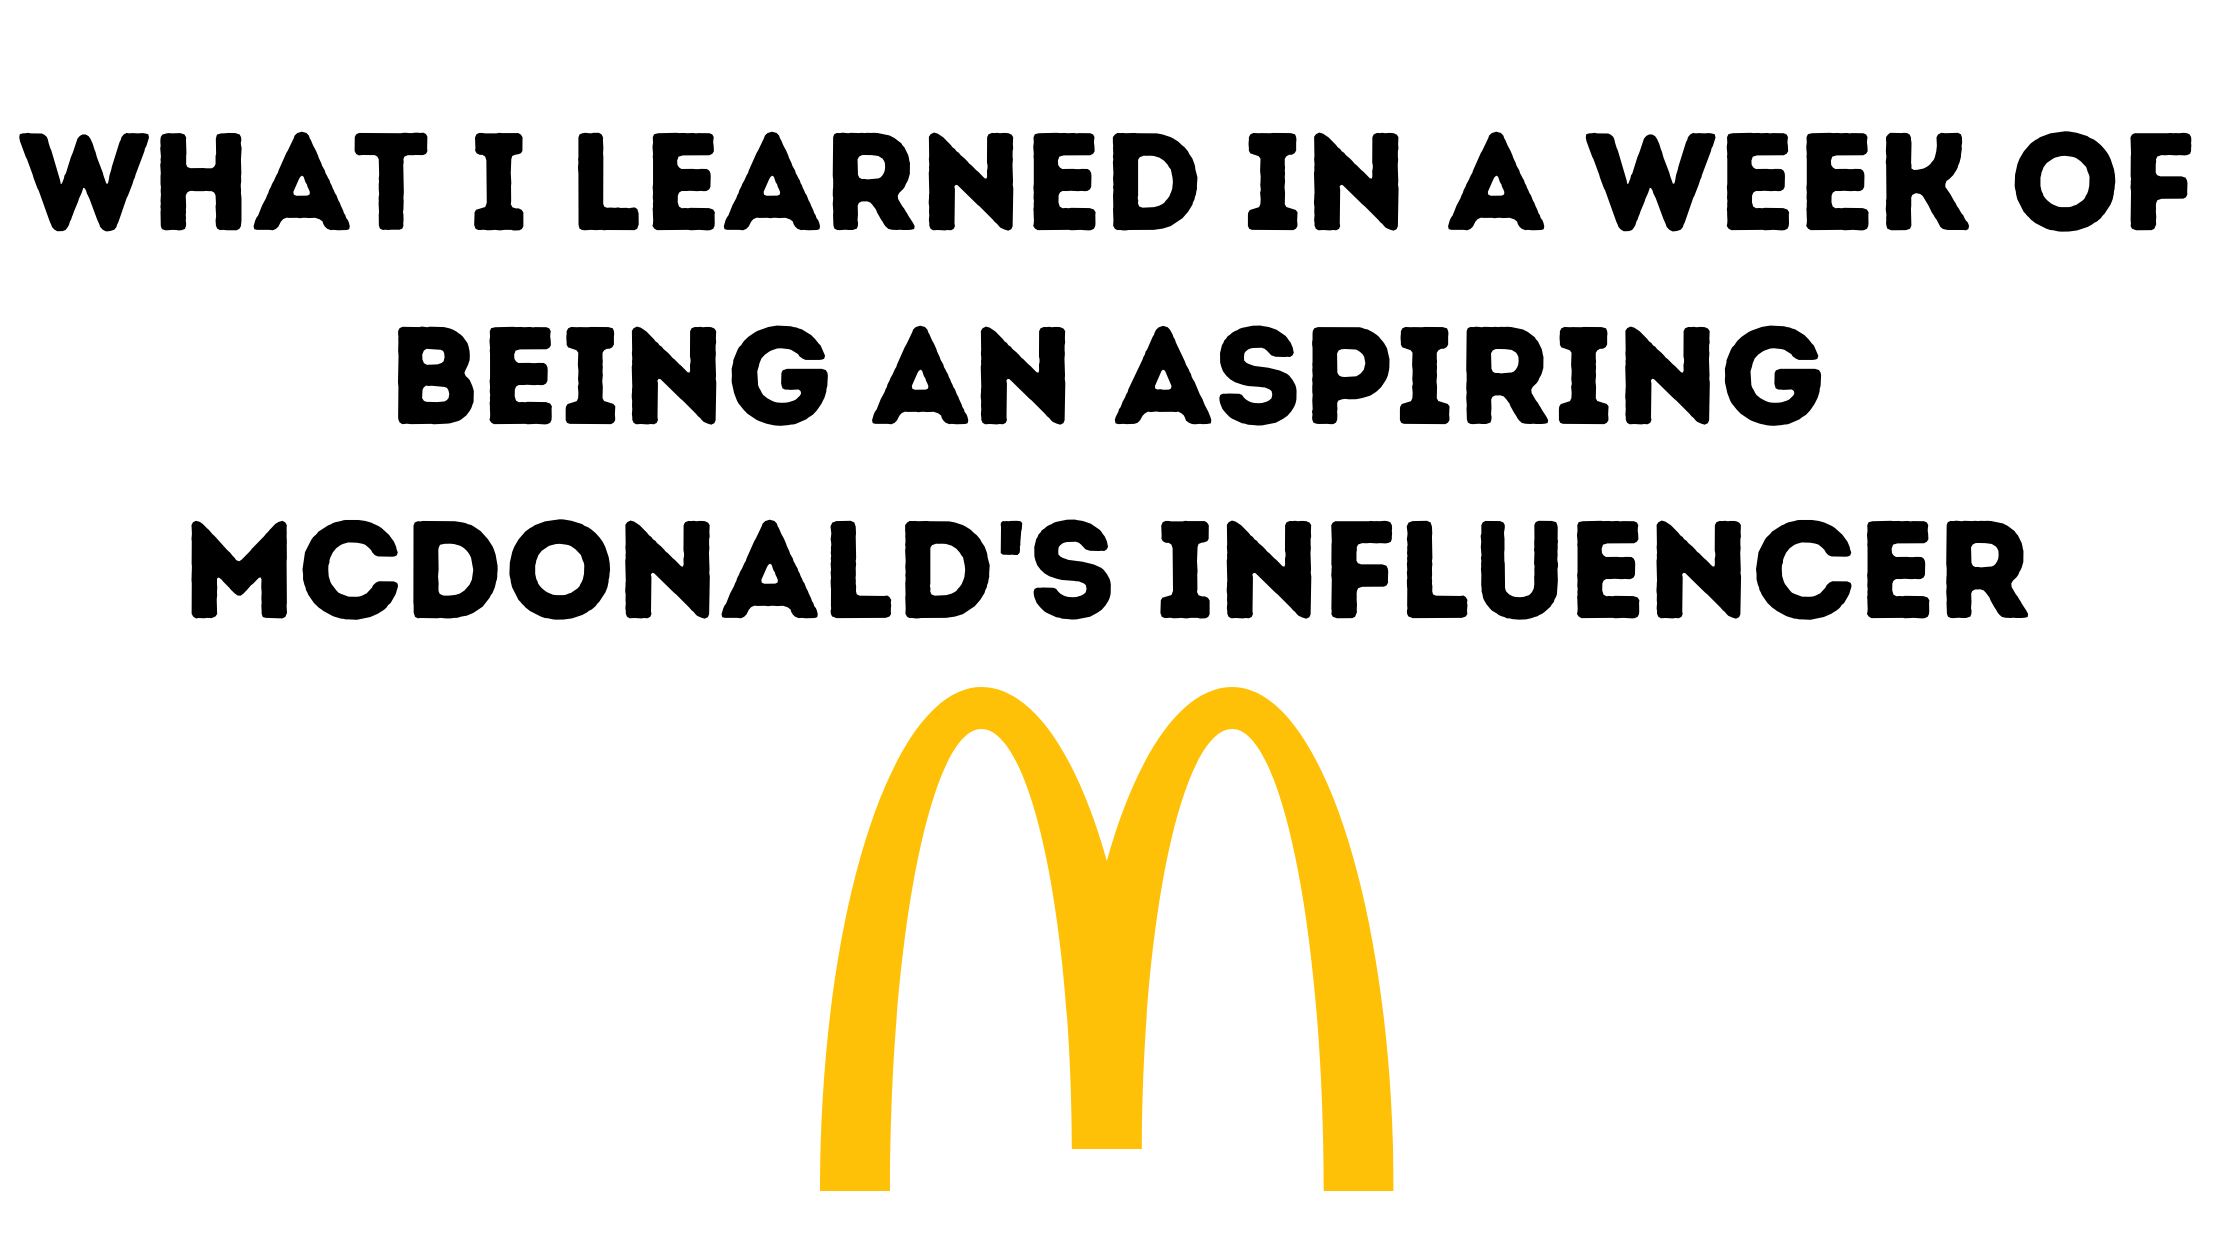 What I Learned in a Week of Being an Aspiring McDonald’s Influencer